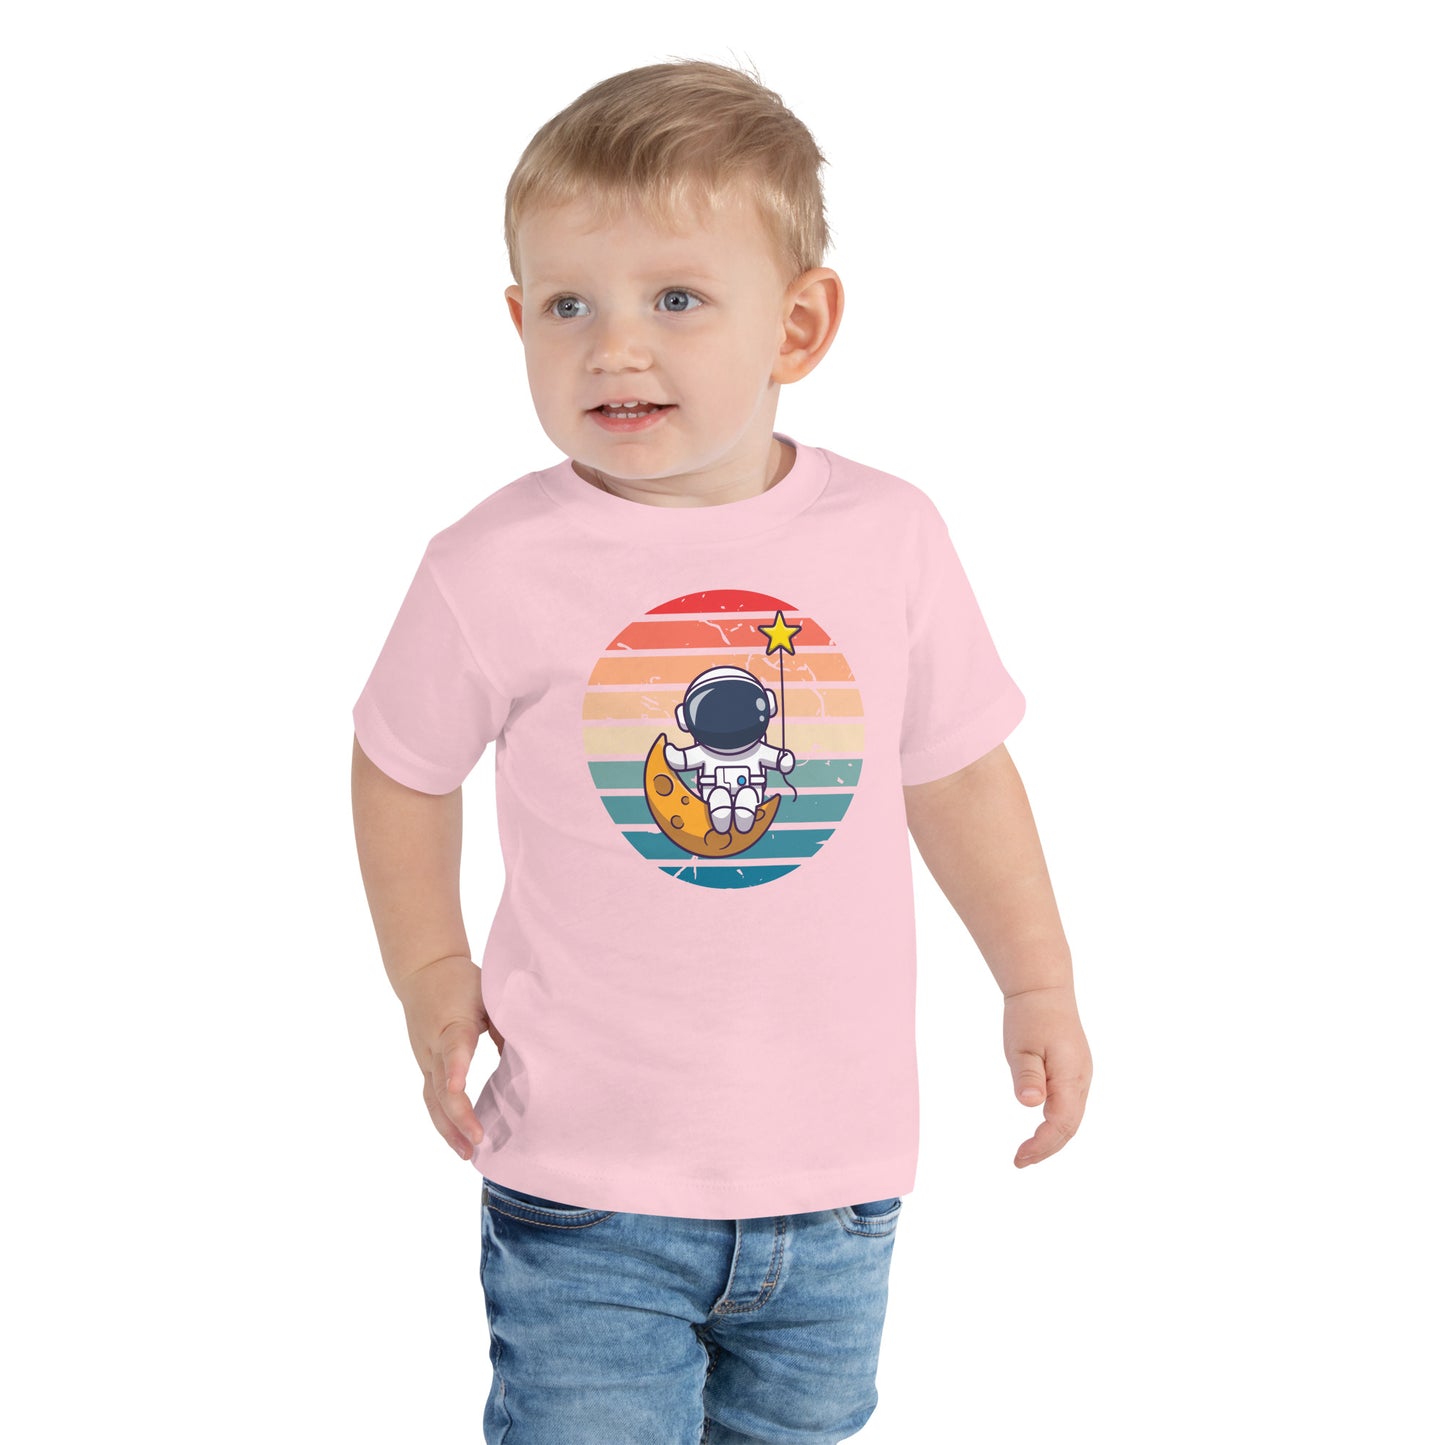 Astronaut sitting Moon Star, Astronaut Shirt, Funny Spaceman Moon, Space Theme Party, Space Birthday Toddler Short Sleeve Tee